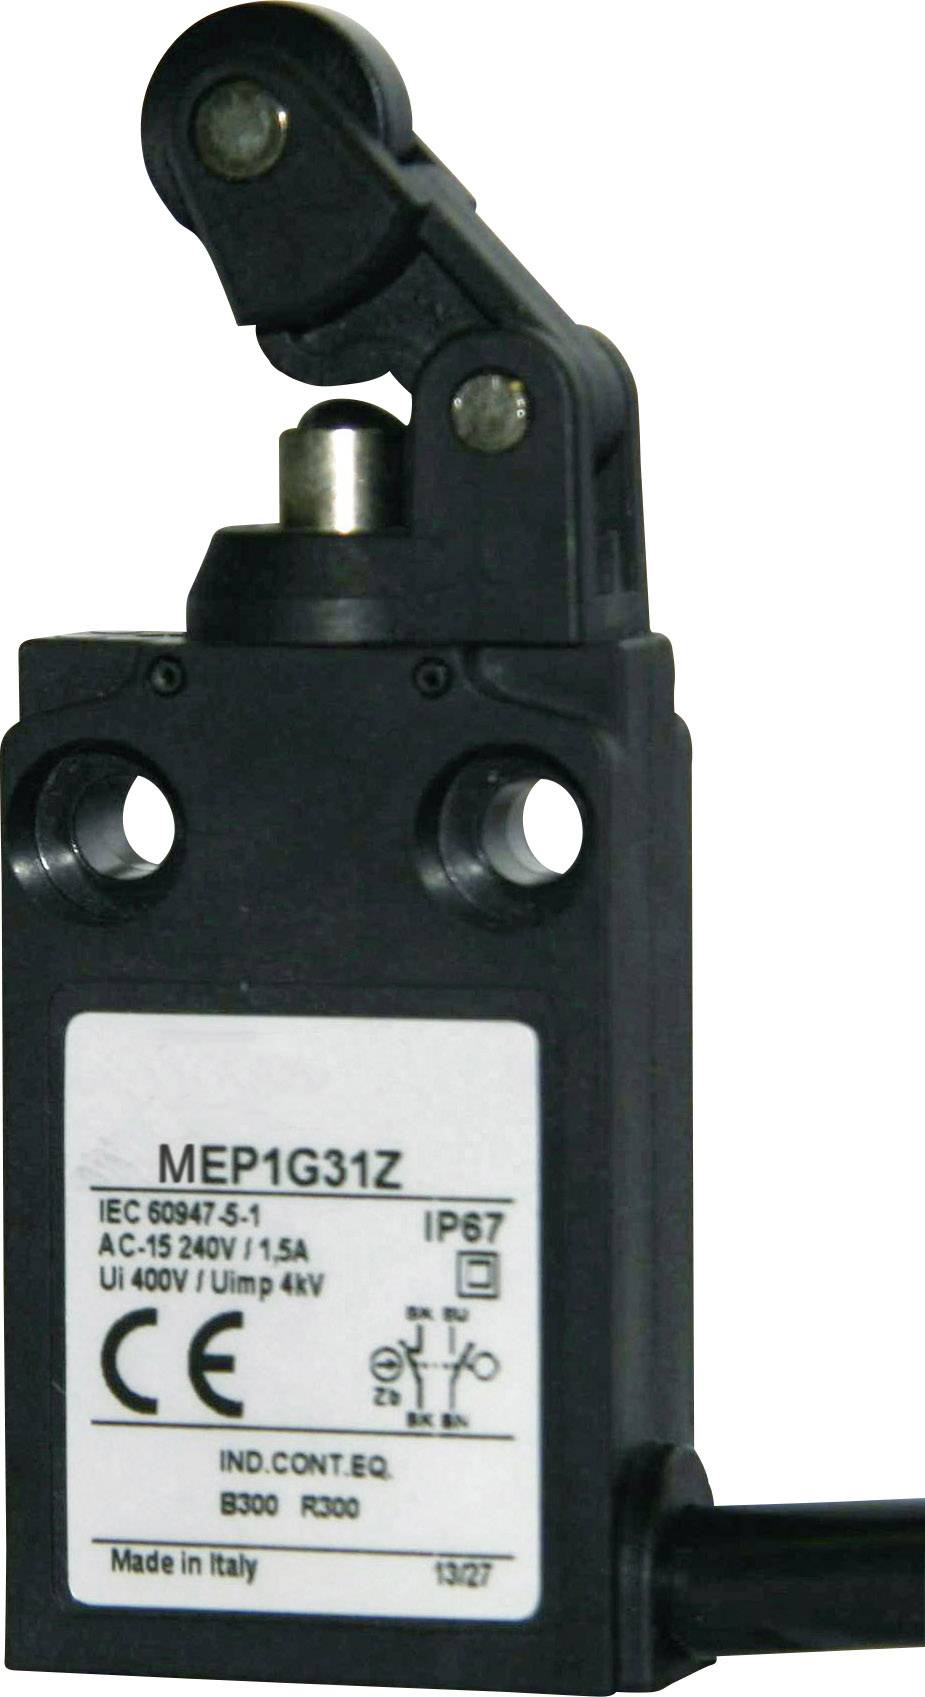 PANASONIC LIMIT SWITCH ANGLED LEVER WITH ROLLER MEP1G31Z